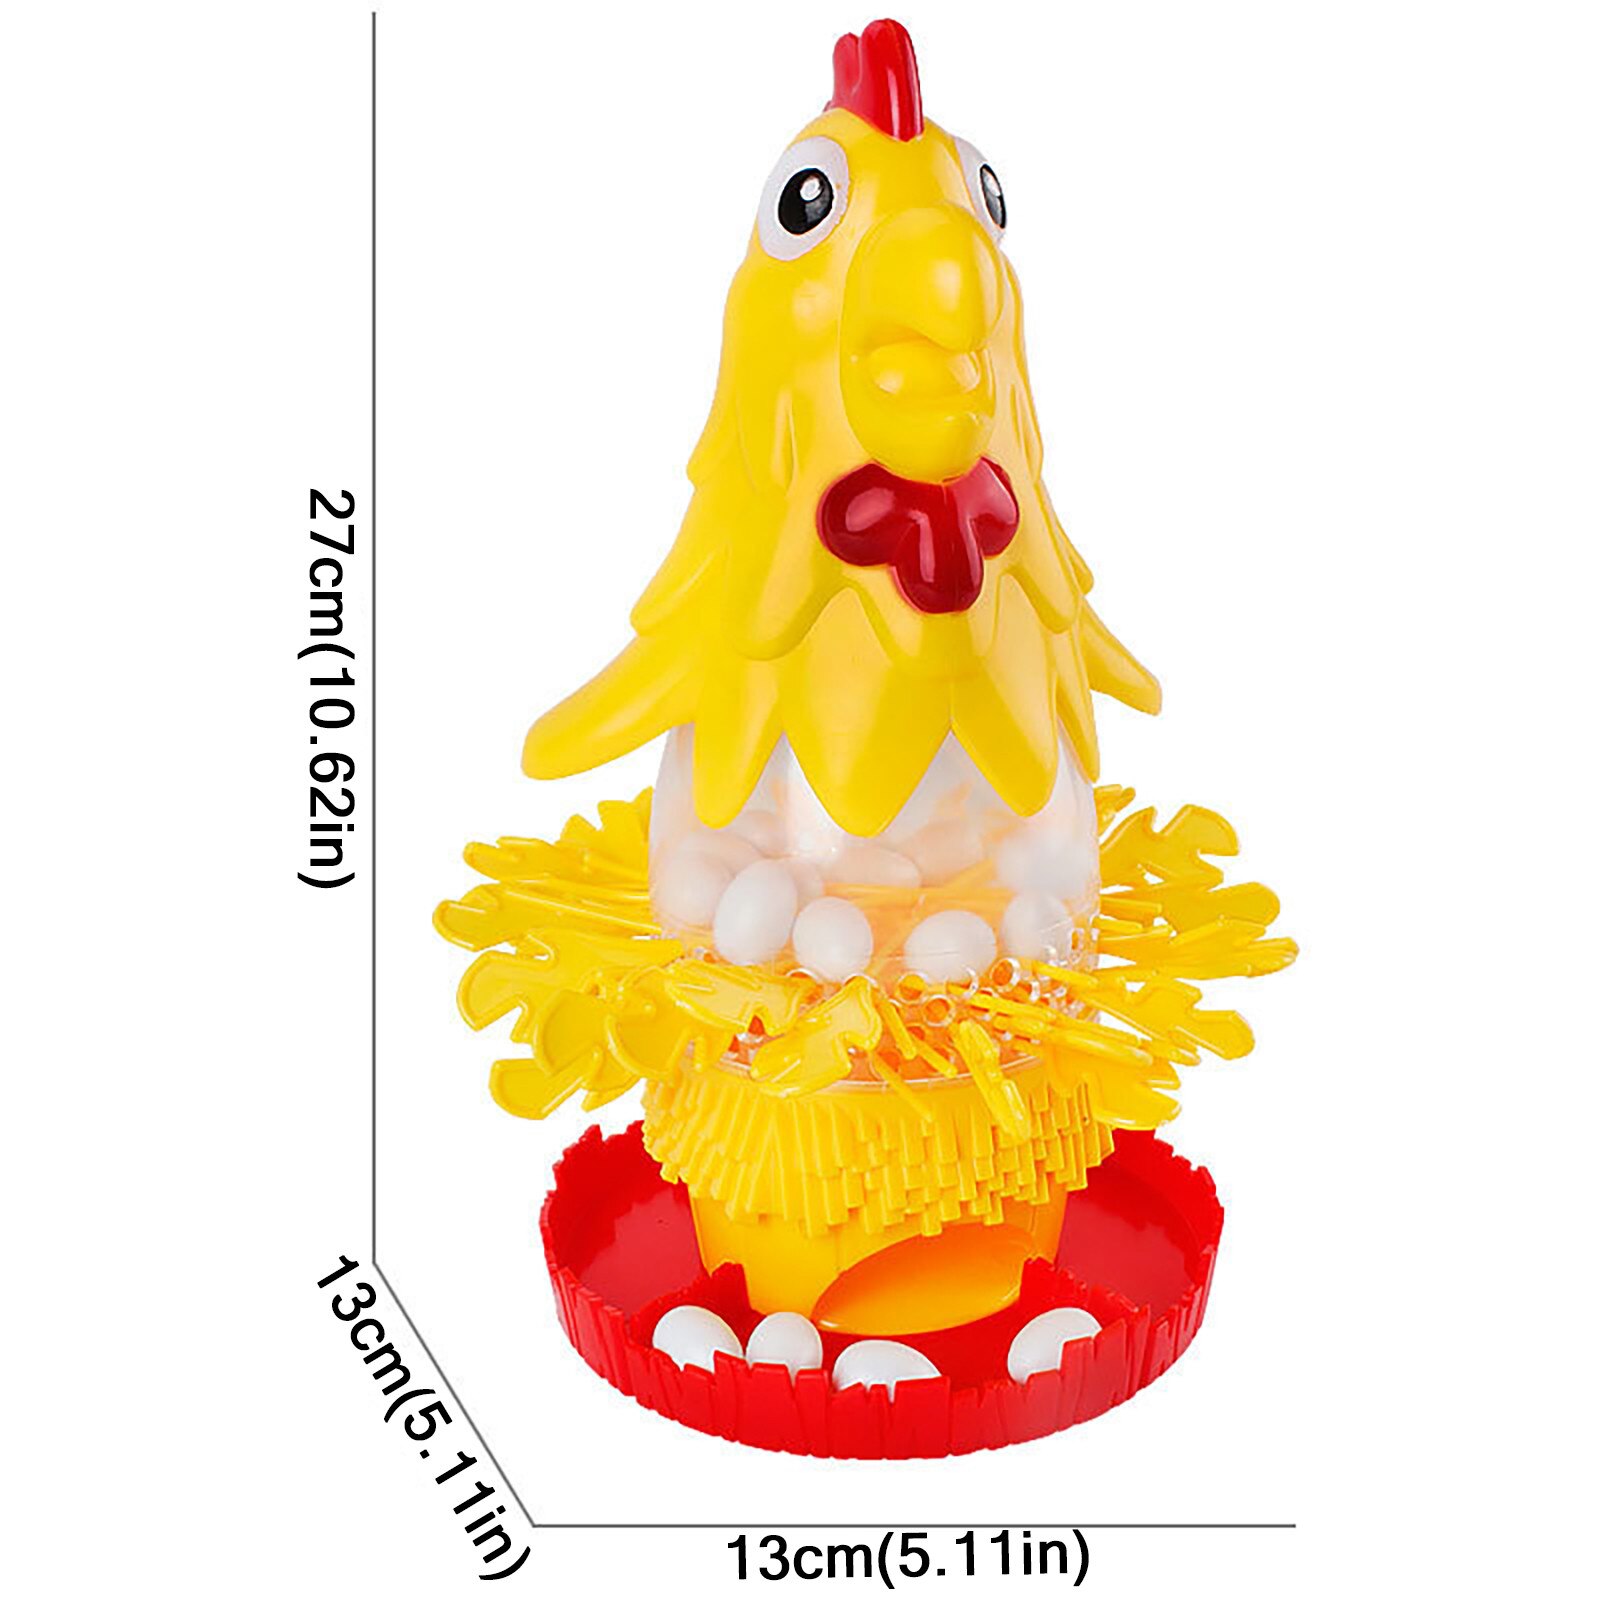 Chicken Chicken Trichotillomania Game Rooster To Lay Eggs Fun Funny Gadgets Novelty Interesting Toys For Children